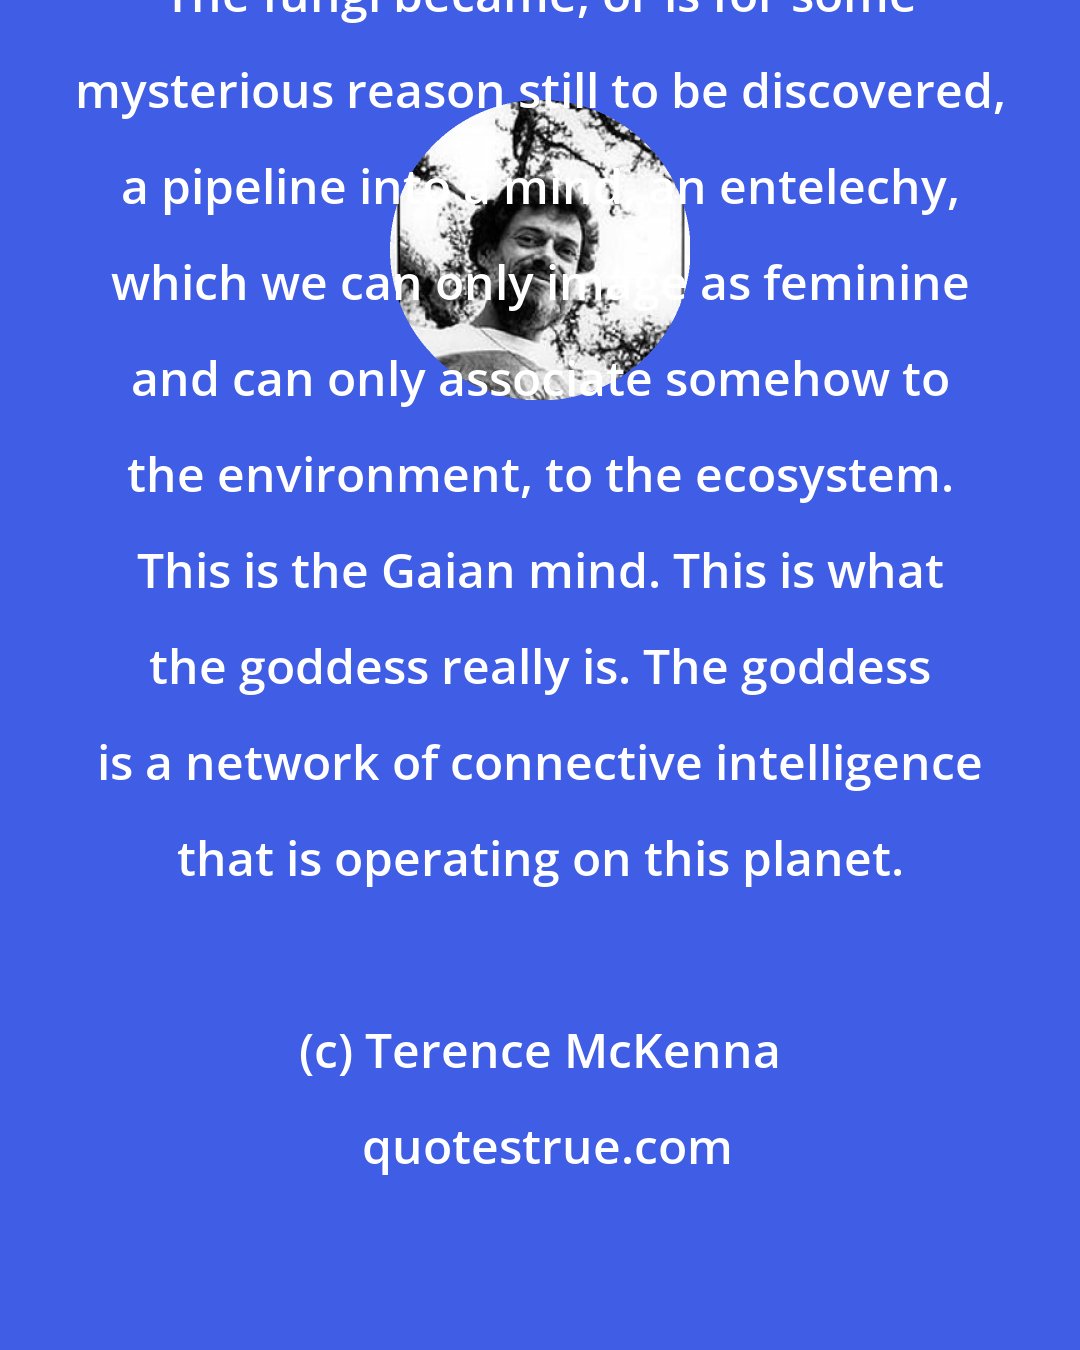 Terence McKenna: The fungi became, or is for some mysterious reason still to be discovered, a pipeline into a mind, an entelechy, which we can only image as feminine and can only associate somehow to the environment, to the ecosystem. This is the Gaian mind. This is what the goddess really is. The goddess is a network of connective intelligence that is operating on this planet.